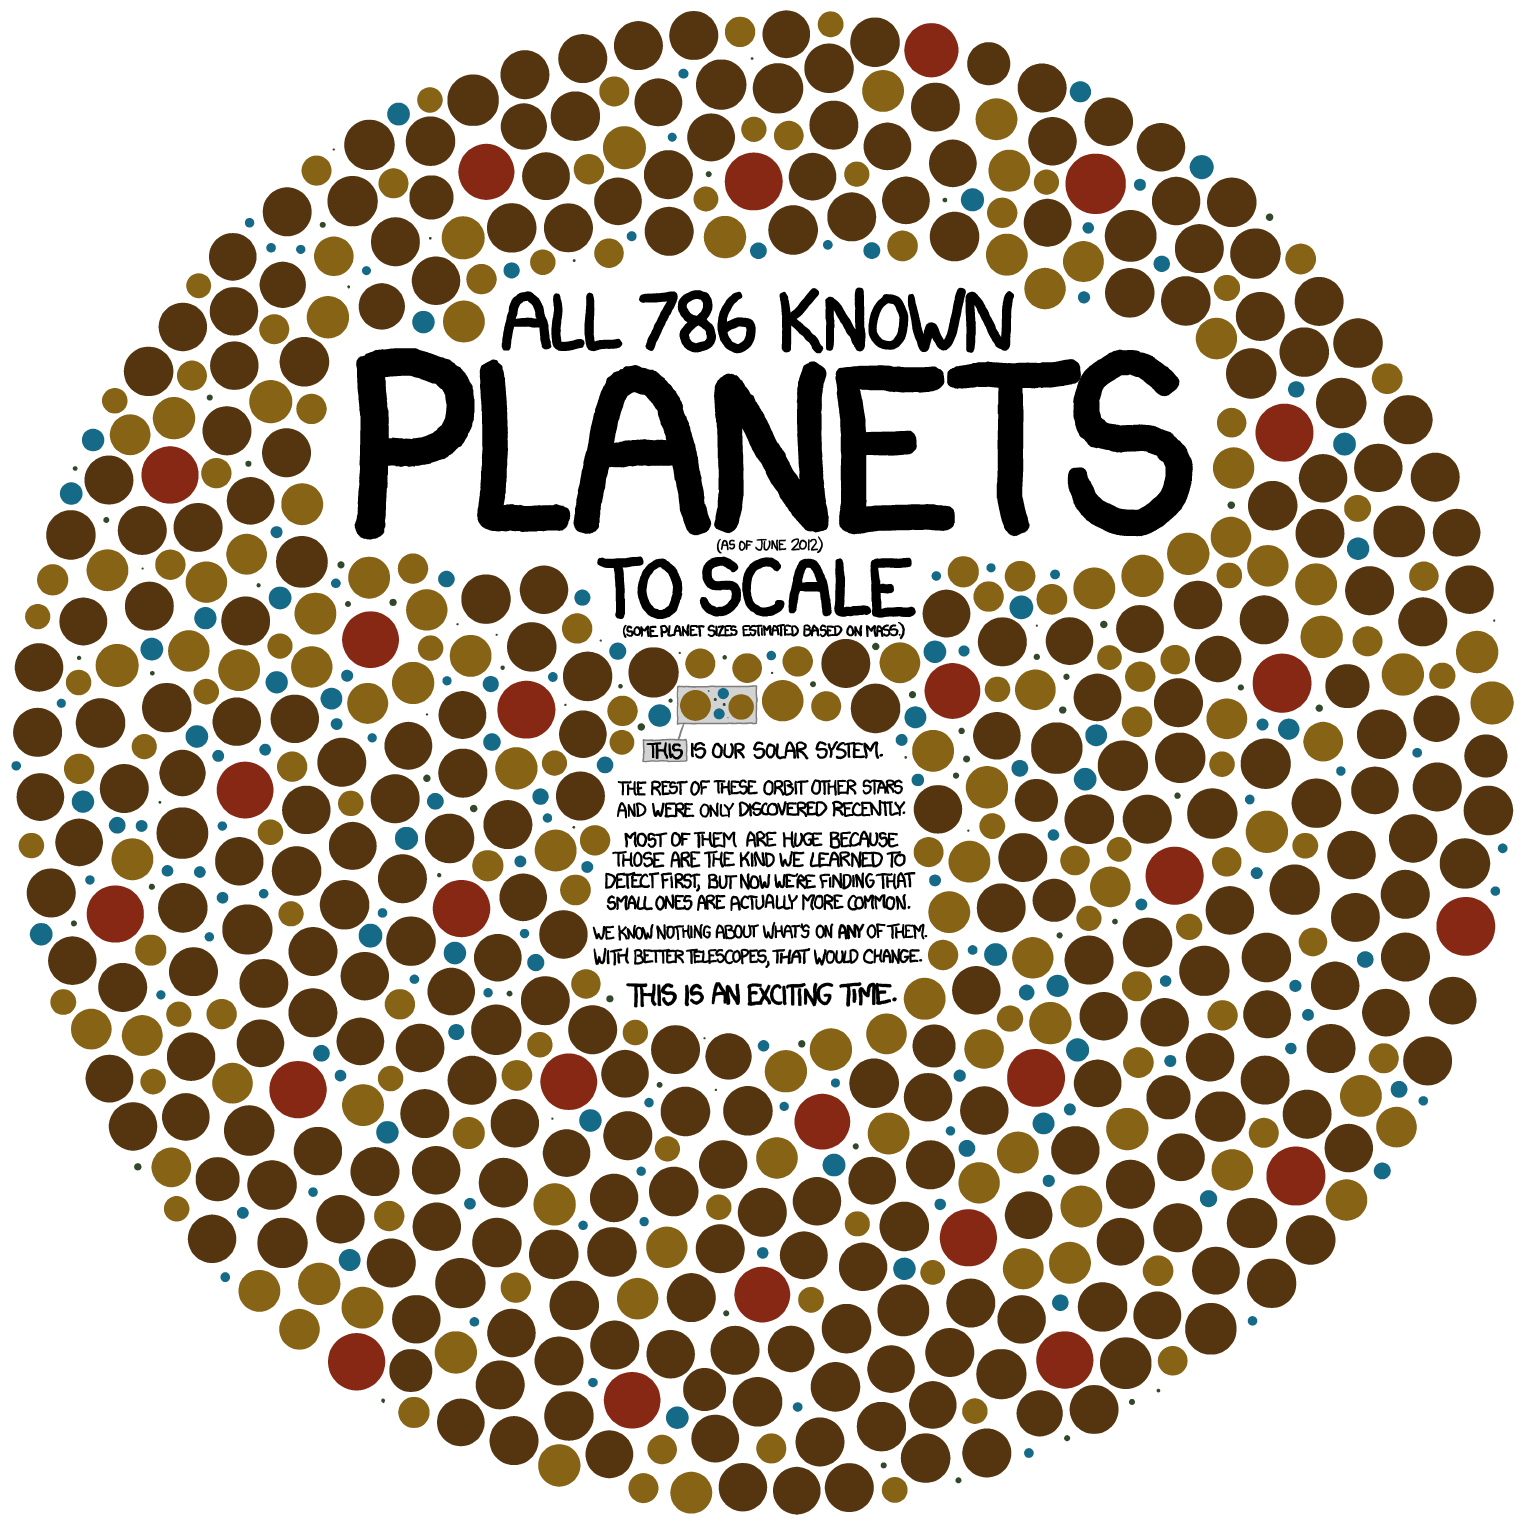 exoplanets_large.png